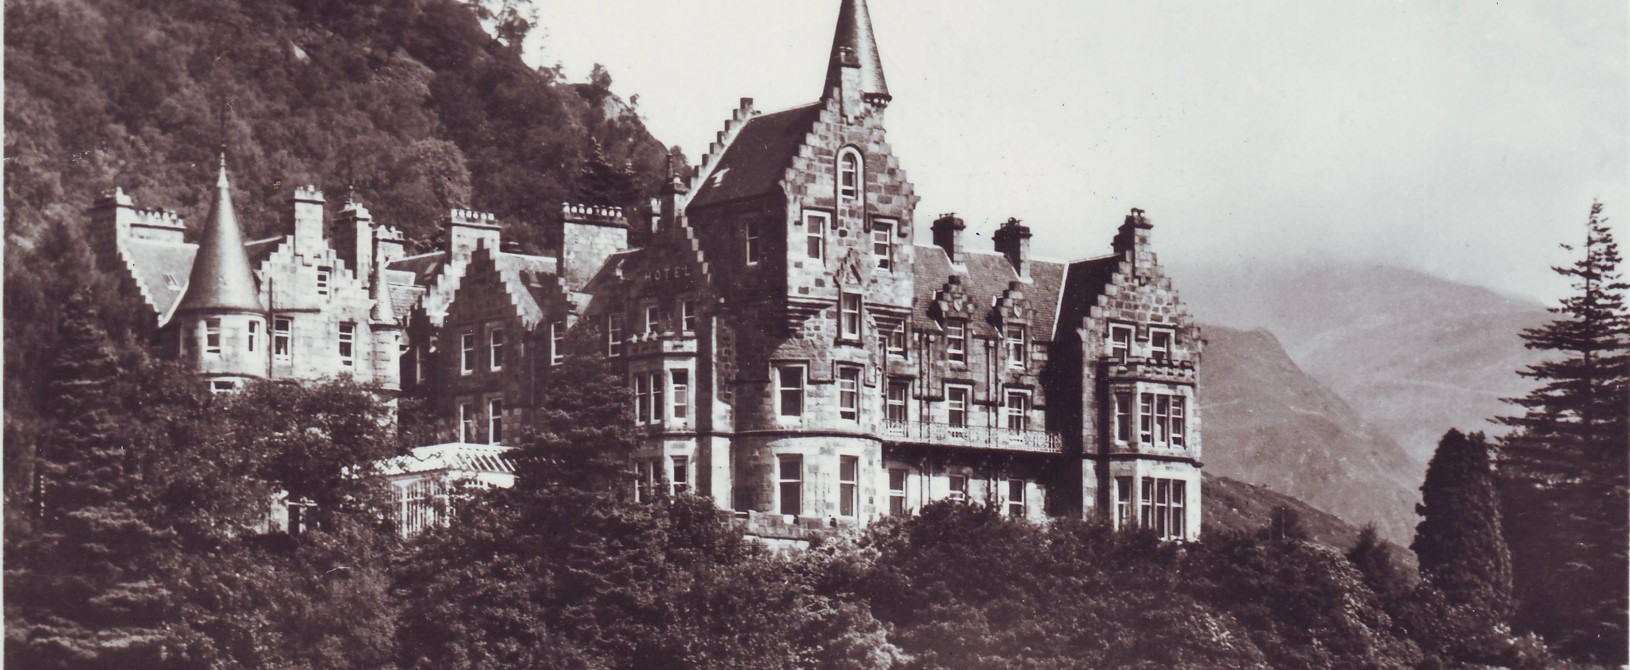 An old black and white photograph of Loch Awe hotel from the beginning of the last century